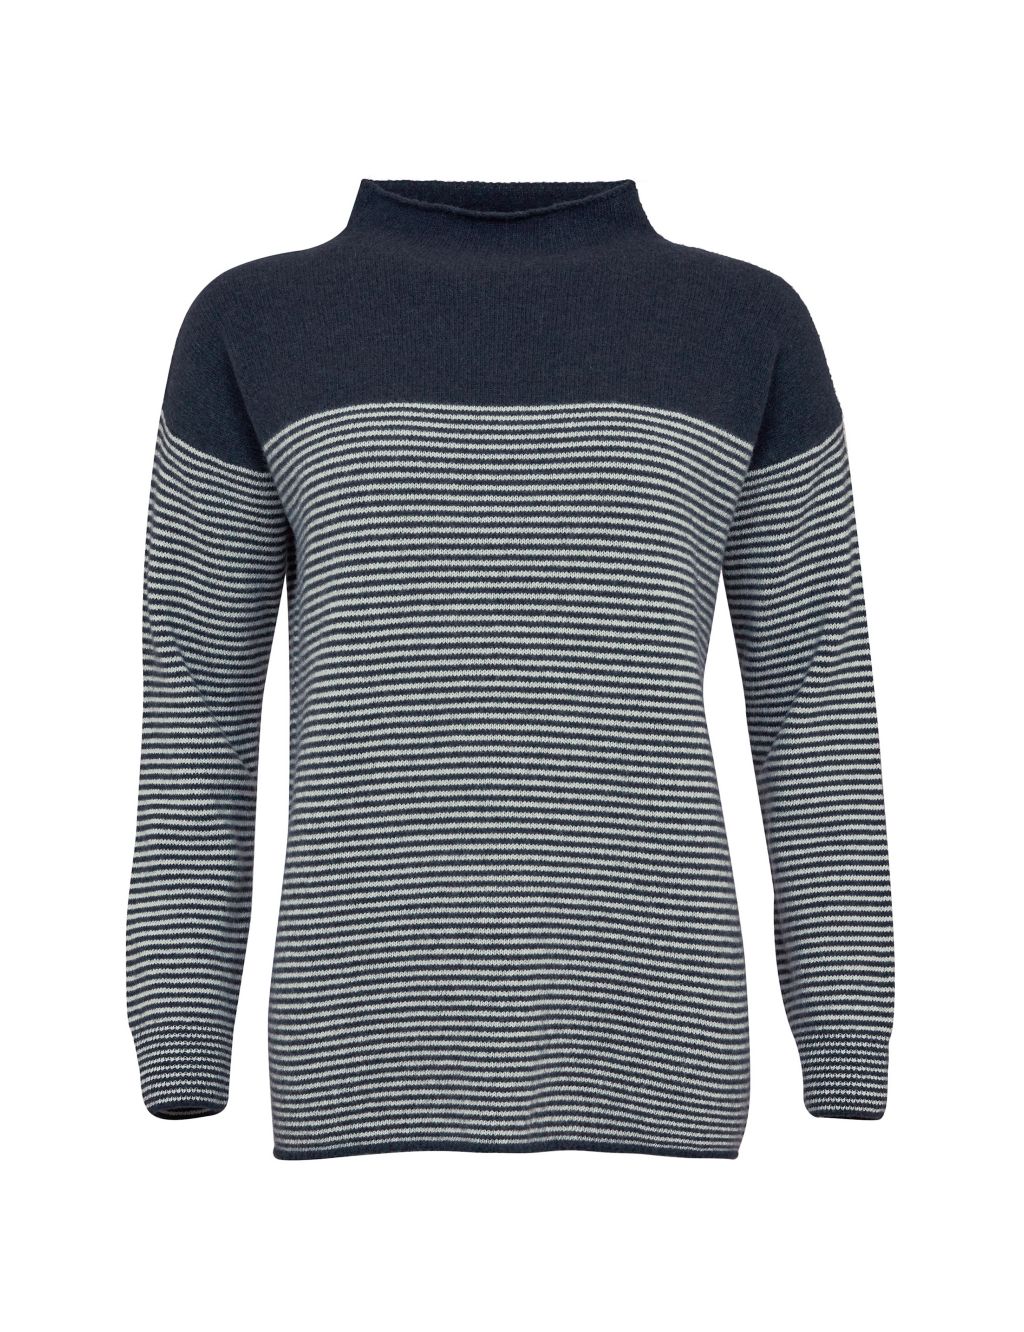 Pure Wool Striped Funnel Neck Jumper image 2